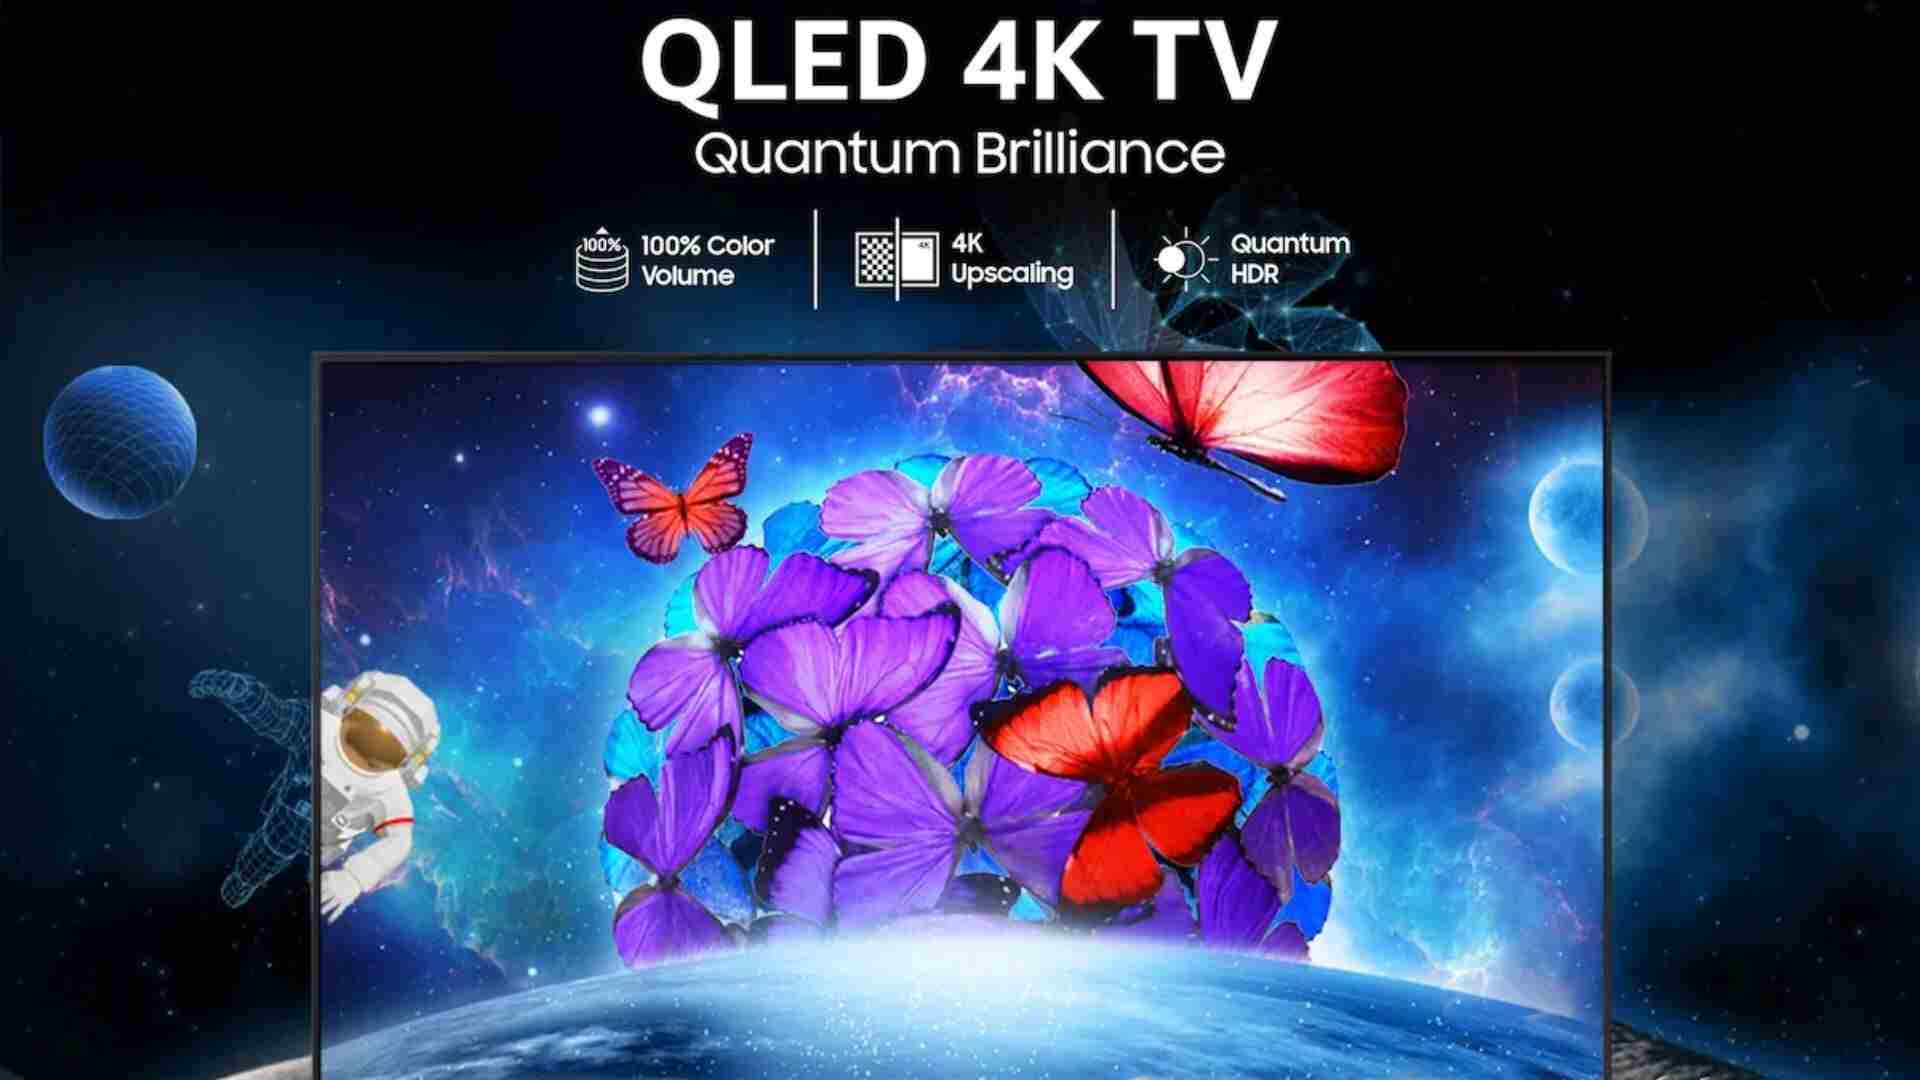 The Newest QLED 4K TV Series Launched In India By Samsung: Check Price, Features